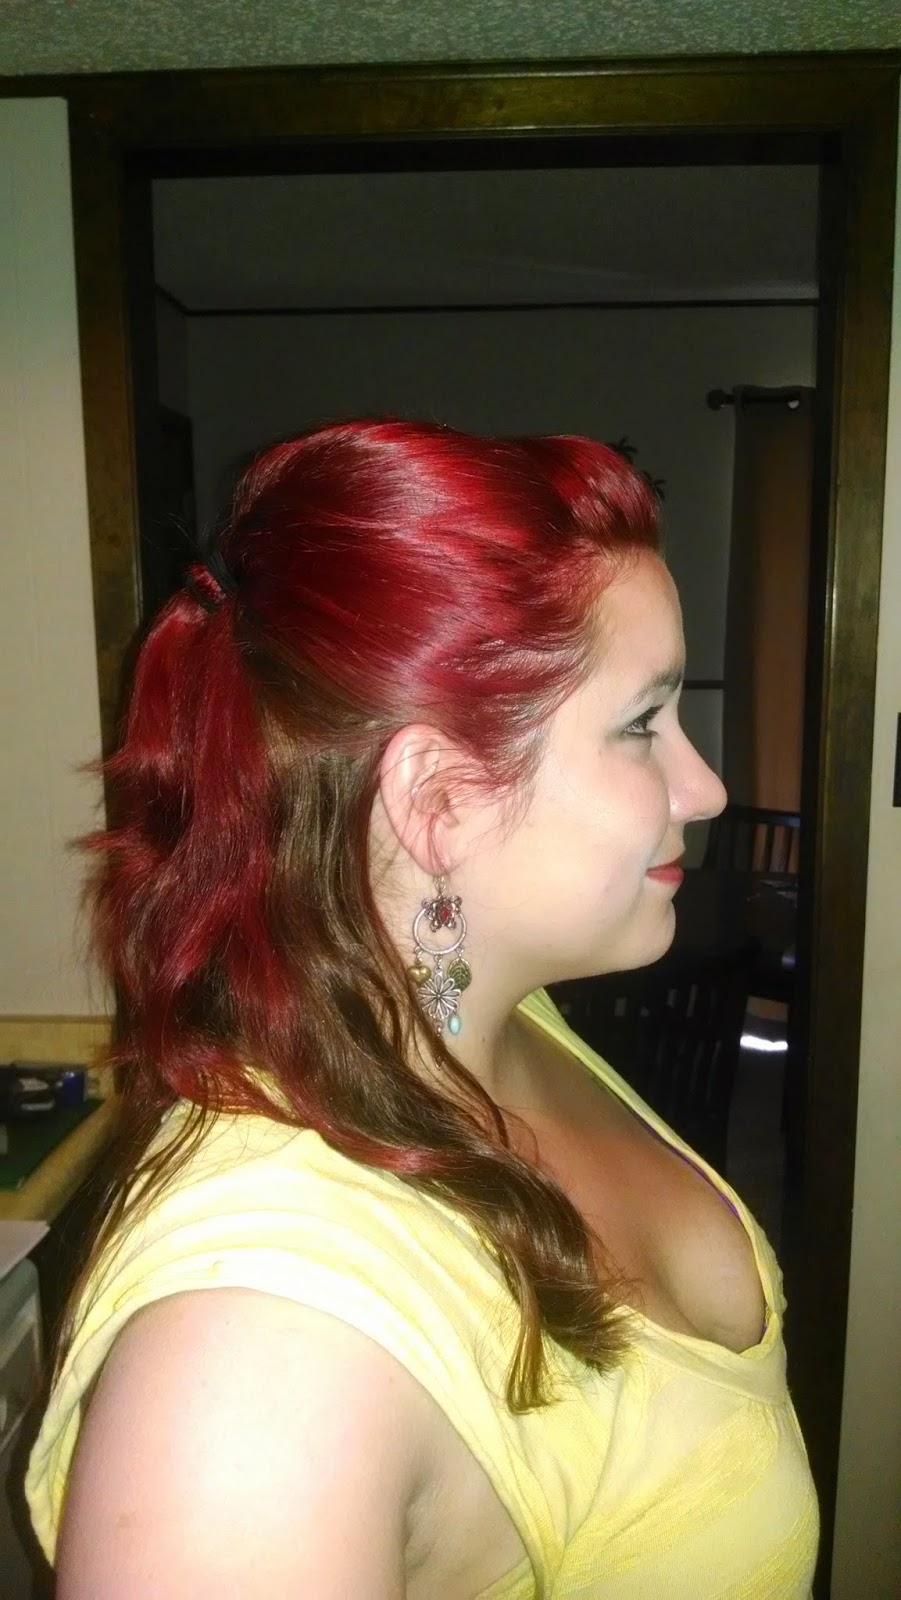 Theresa M Jones How To Dye Your Hair Two Tones Red On Top And